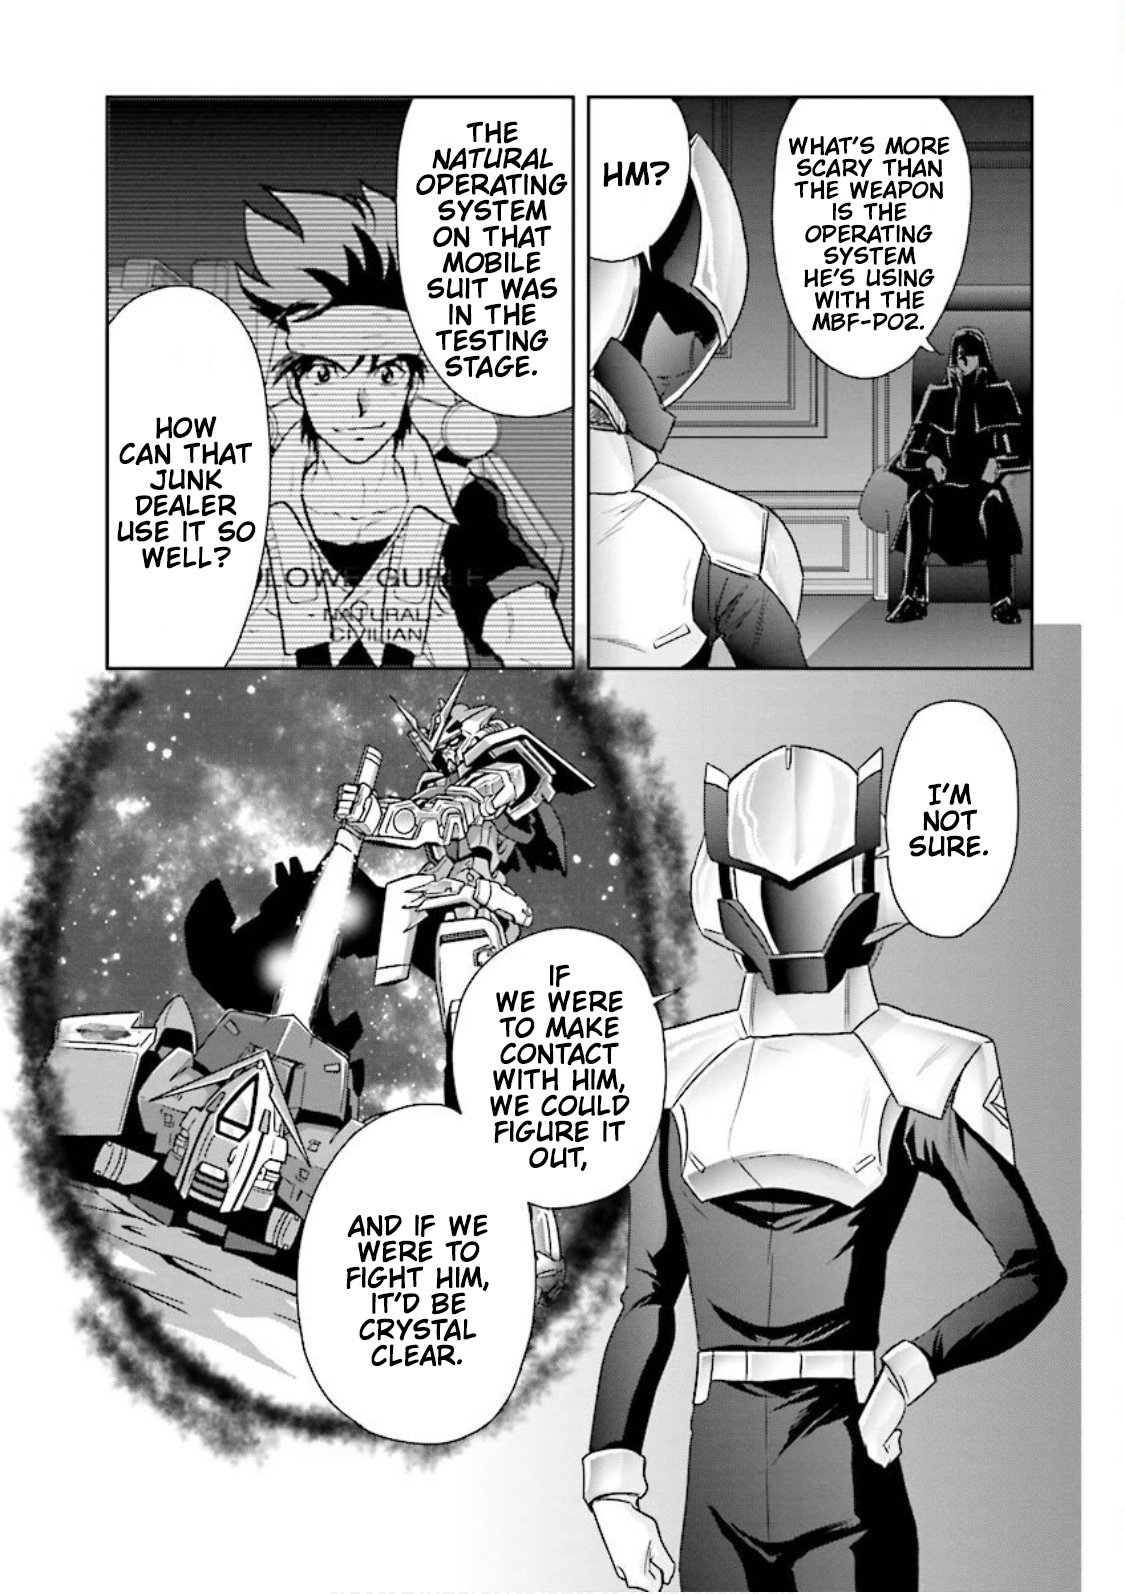 Mobile Suit Gundam Seed Astray Re:master Edition Chapter 5.5 #8